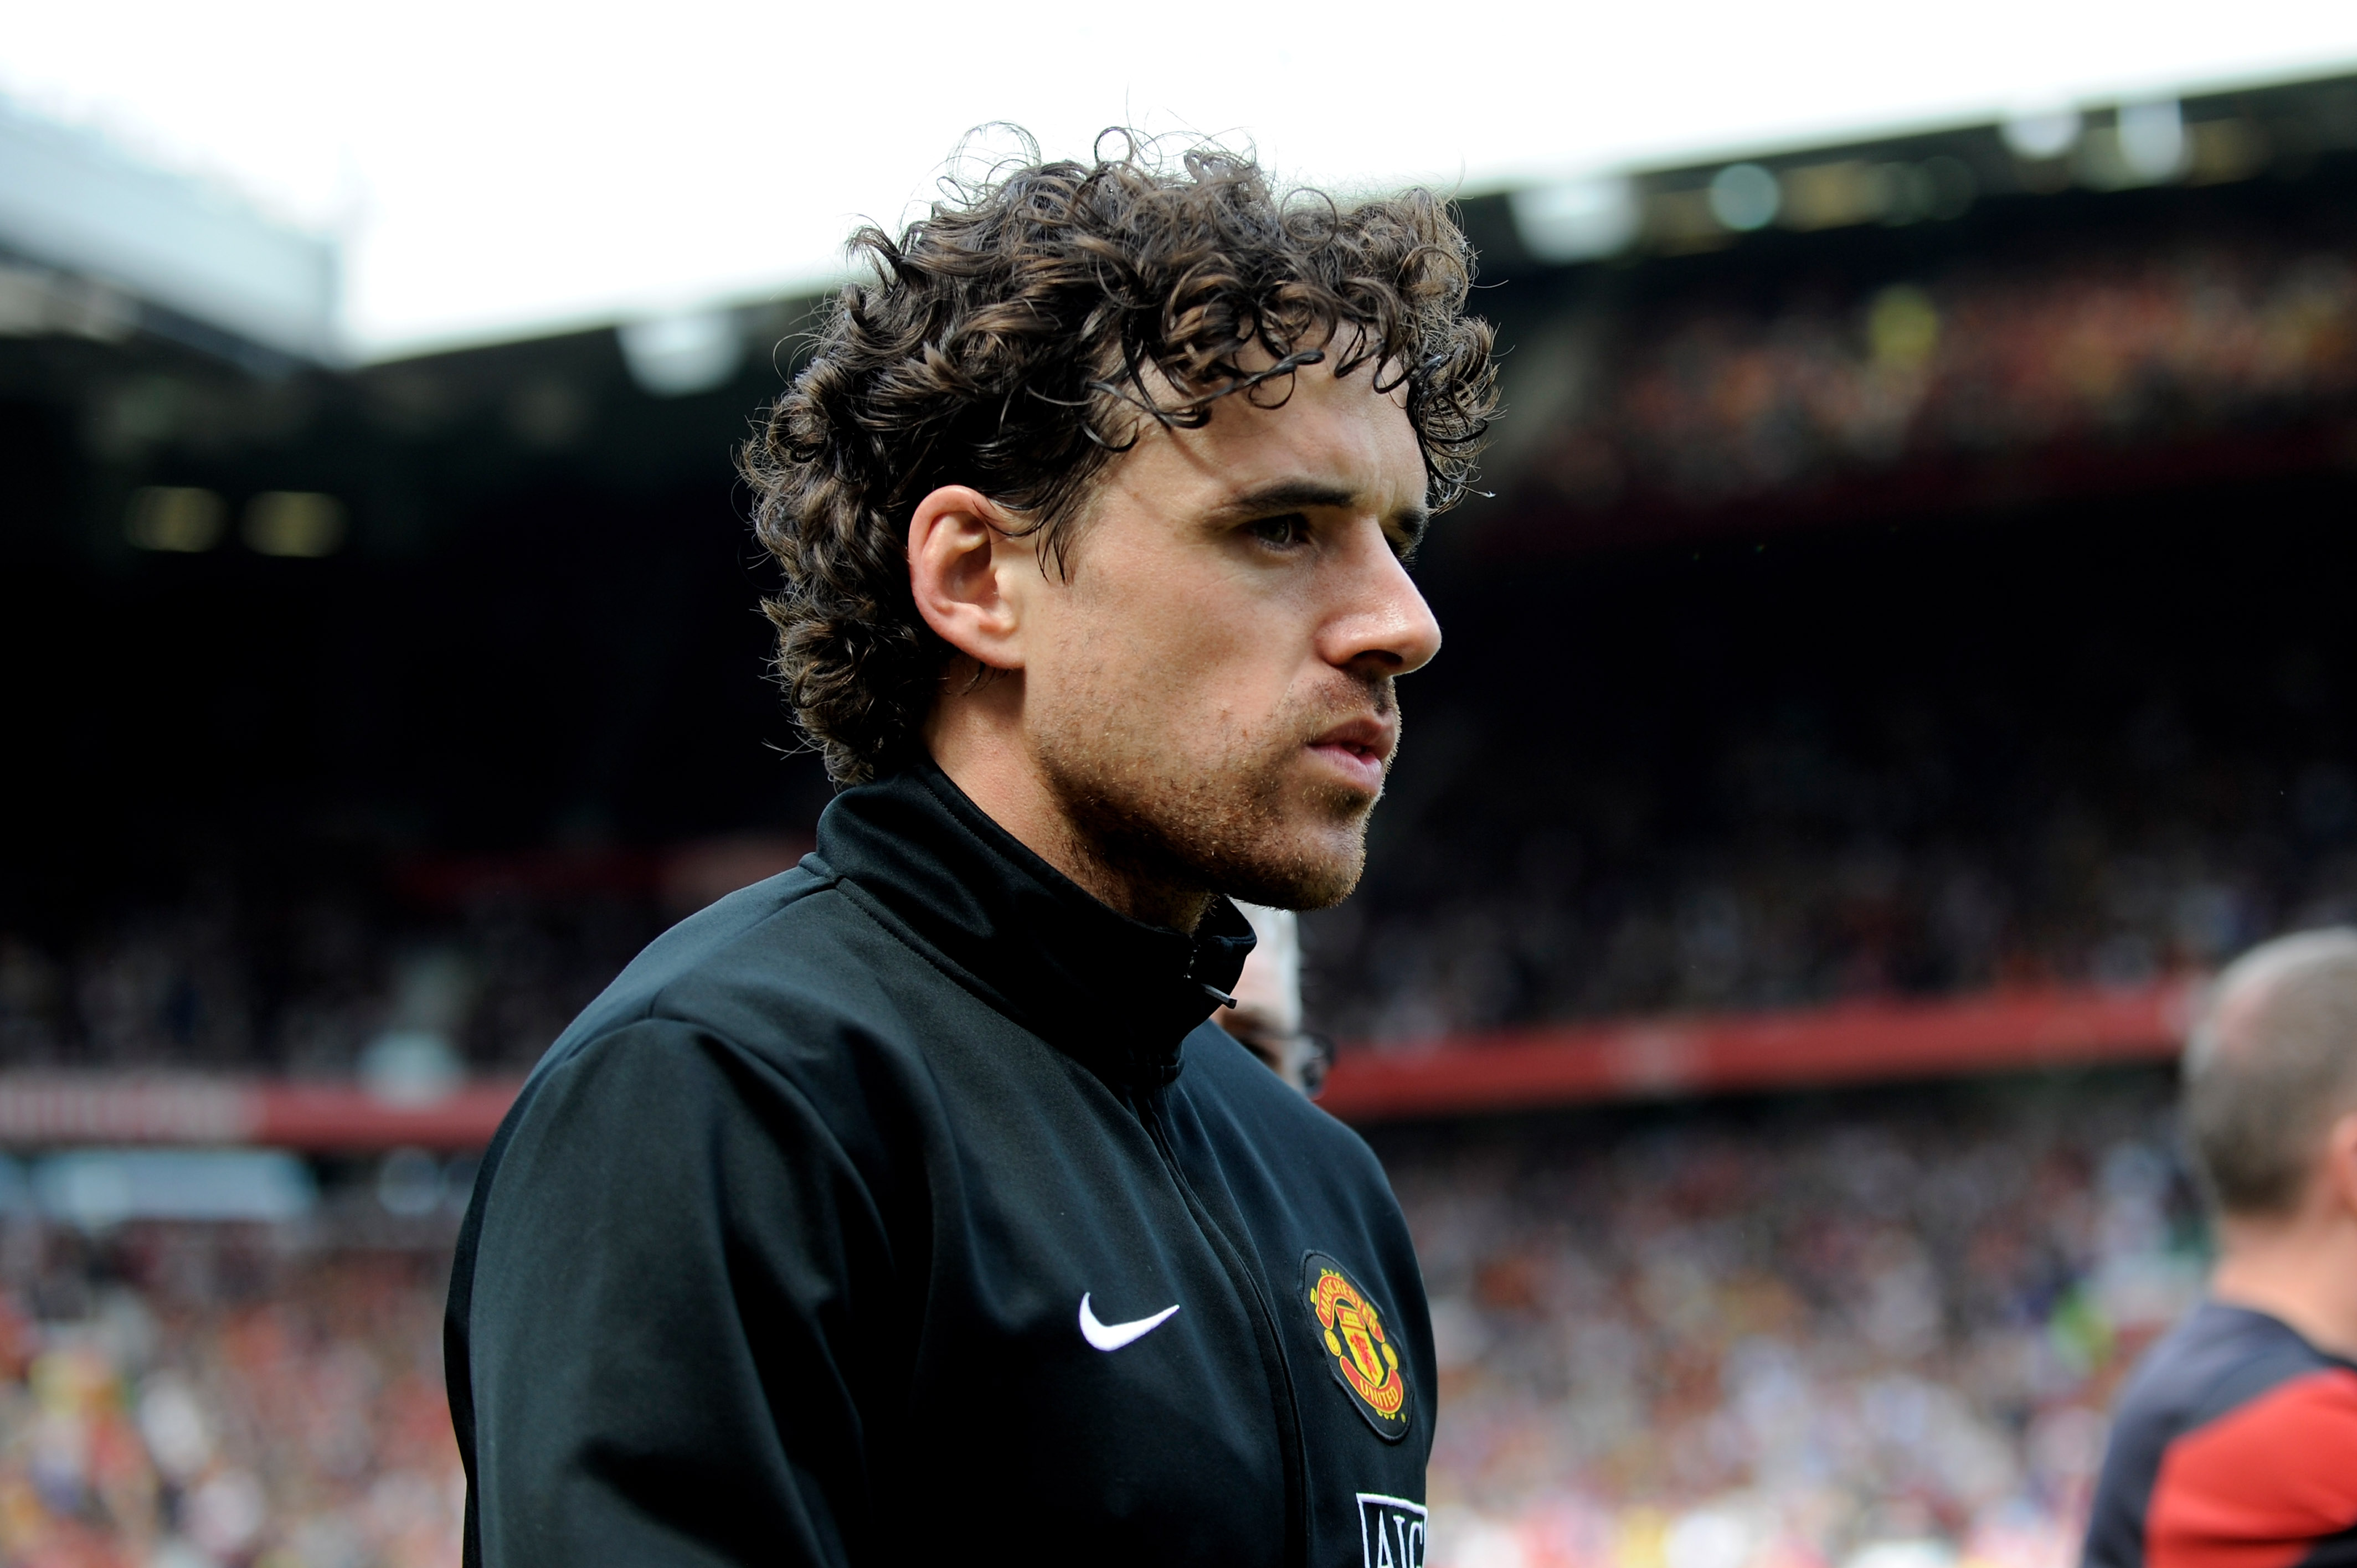 MANCHESTER, ENGLAND - APRIL 24:   Owen Hargreaves  of Manchester United heads for the bench prior to the Barclays Premier League match between Manchester United and Tottenham Hotspur at Old Trafford on April 24, 2010 in Manchester, England.  (Photo by Mic